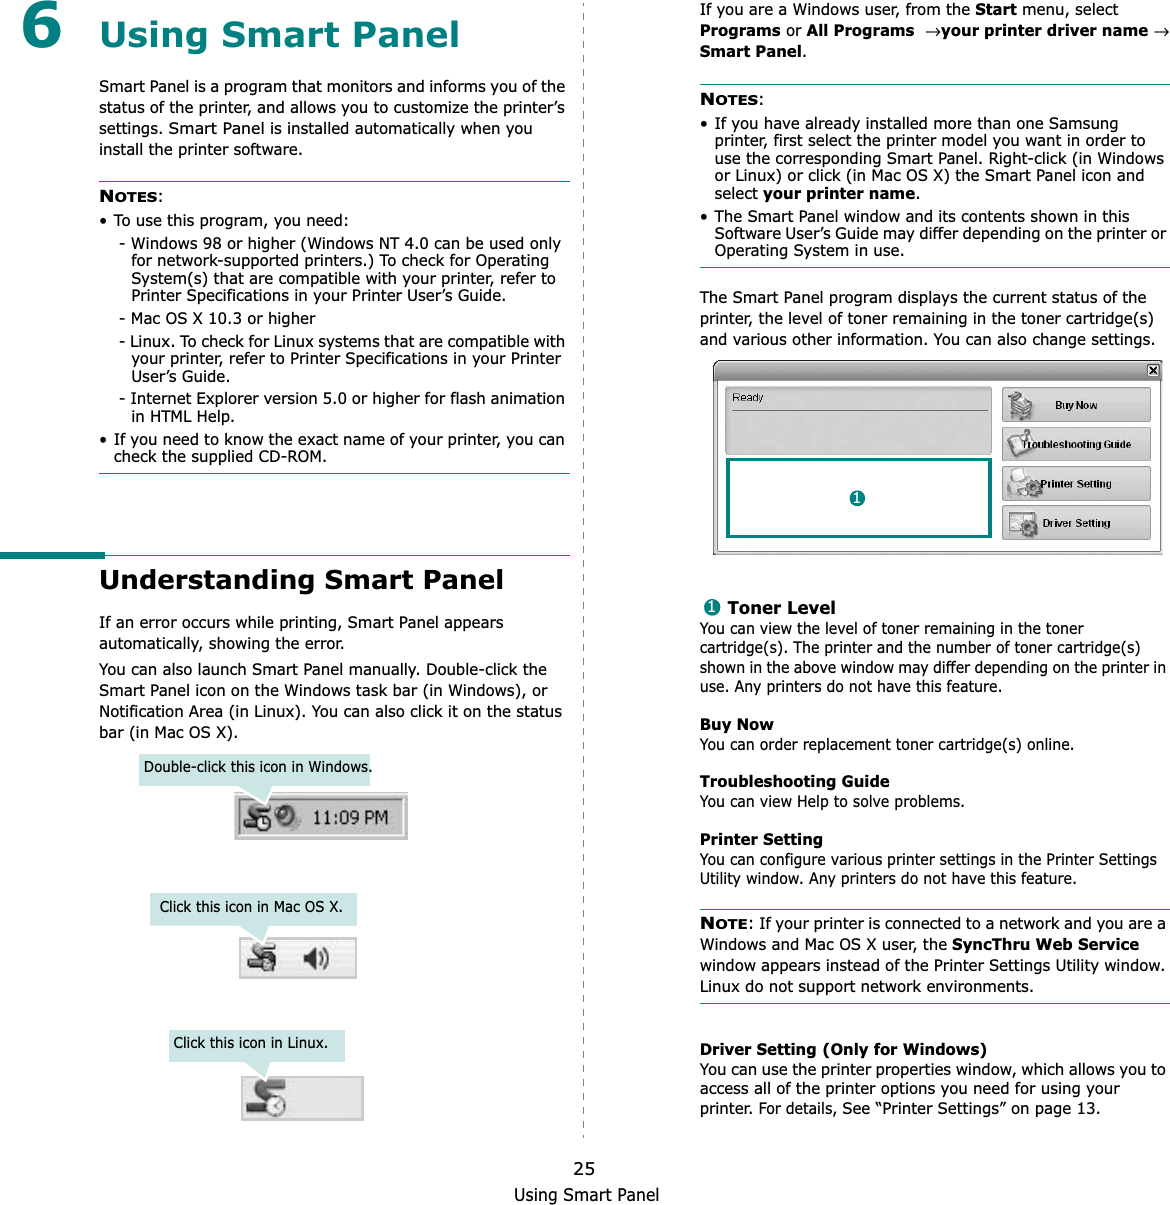 Using Smart Panel256Using Smart PanelSmart Panel is a program that monitors and informs you of the status of the printer, and allows you to customize the printer’s settings.Smart Panel is installed automatically when you install the printer software.NOTES:• To use this program, you need:- Windows 98 or higher (Windows NT 4.0 can be used only for network-supported printers.) To check for Operating System(s) that are compatible with your printer, refer to Printer Specifications in your Printer User’s Guide.- Mac OS X 10.3 or higher- Linux. To check for Linux systems that are compatible with your printer, refer to Printer Specifications in your Printer User’s Guide.- Internet Explorer version 5.0 or higher for flash animation in HTML Help.• If you need to know the exact name of your printer, you can check the supplied CD-ROM.Understanding Smart PanelIf an error occurs while printing, Smart Panel appears automatically, showing the error.You can also launch Smart Panel manually. Double-click the Smart Panel icon on the Windows task bar (in Windows), or Notification Area (in Linux). You can also click it on the status bar (in Mac OS X).Double-click this icon in Windows.Click this icon in Mac OS X.Click this icon in Linux.If you are a Windows user, from the Start menu, select Programs or All Programs→ your printer driver name→ Smart Panel.NOTES:• If you have already installed more than one Samsung printer, first select the printer model you want in order to use the corresponding Smart Panel. Right-click (in Windows or Linux) or click (in Mac OS X) the Smart Panel icon and select your printer name.• The Smart Panel window and its contents shown in this Software User’s Guide may differ depending on the printer or Operating System in use.The Smart Panel program displays the current status of the printer, the level of toner remaining in the toner cartridge(s) and various other information. You can also change settings.Toner LevelYou can view the level of toner remaining in the toner cartridge(s). The printer and the number of toner cartridge(s) shown in the above window may differ depending on the printer in use. Any printers do not have this feature.Buy NowYou can order replacement toner cartridge(s) online.Troubleshooting GuideYou can view Help to solve problems.Printer SettingYou can configure various printer settings in the Printer Settings Utility window. Any printers do not have this feature.NOTE: If your printer is connected to a network and you are a Windows and Mac OS X user, the SyncThru Web Servicewindow appears instead of the Printer Settings Utility window. Linux do not support network environments.Driver Setting (Only for Windows)You can use the printer properties window, which allows you to access all of the printer options you need for using your printer. For details, See “Printer Settings” on page 13.11